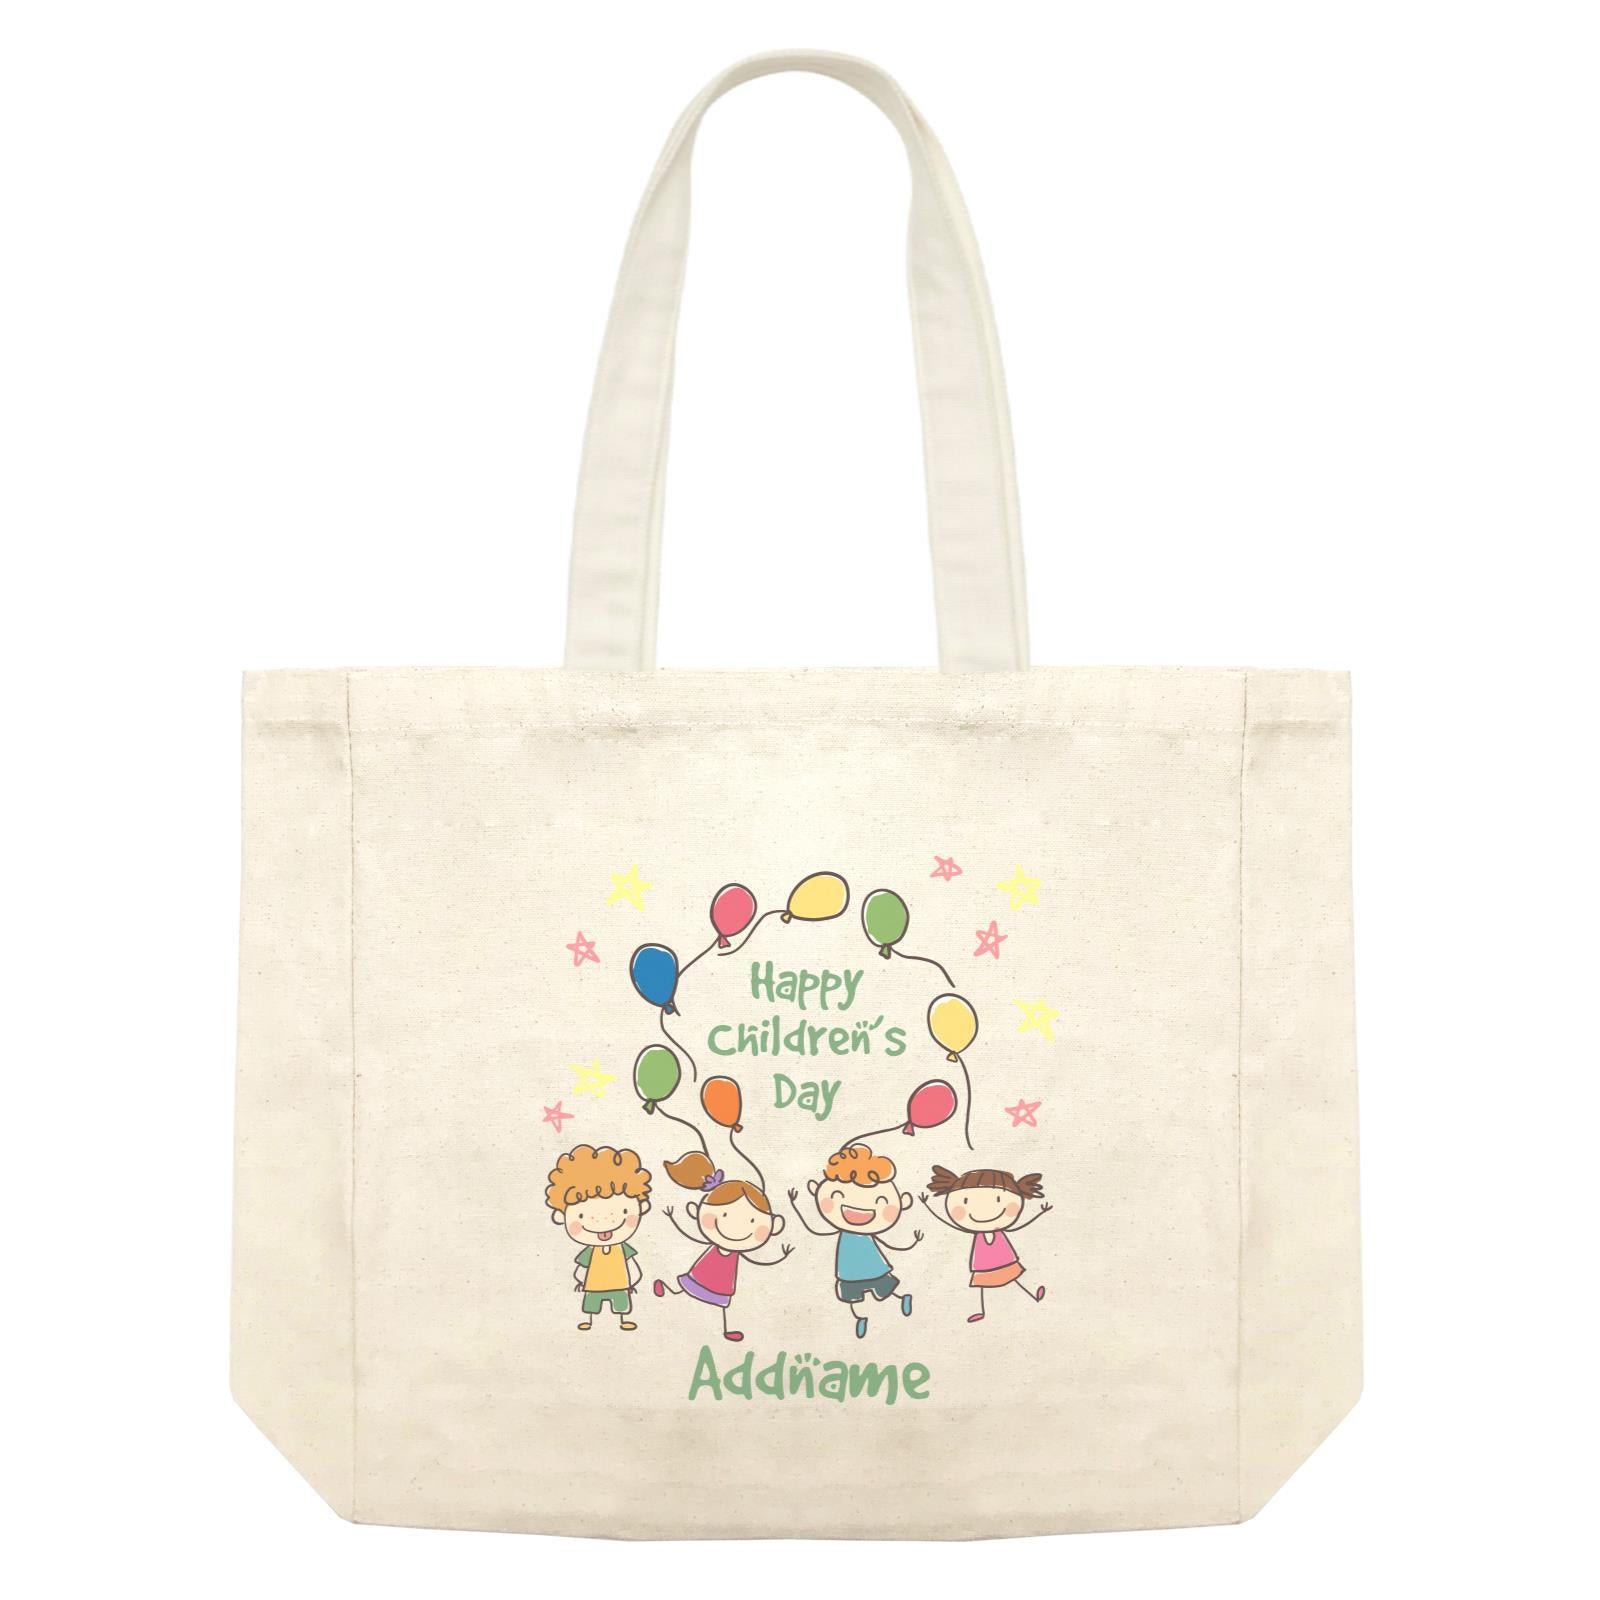 Children's Day Gift Series Four Cute Children With Balloons Addname Shopping Bag